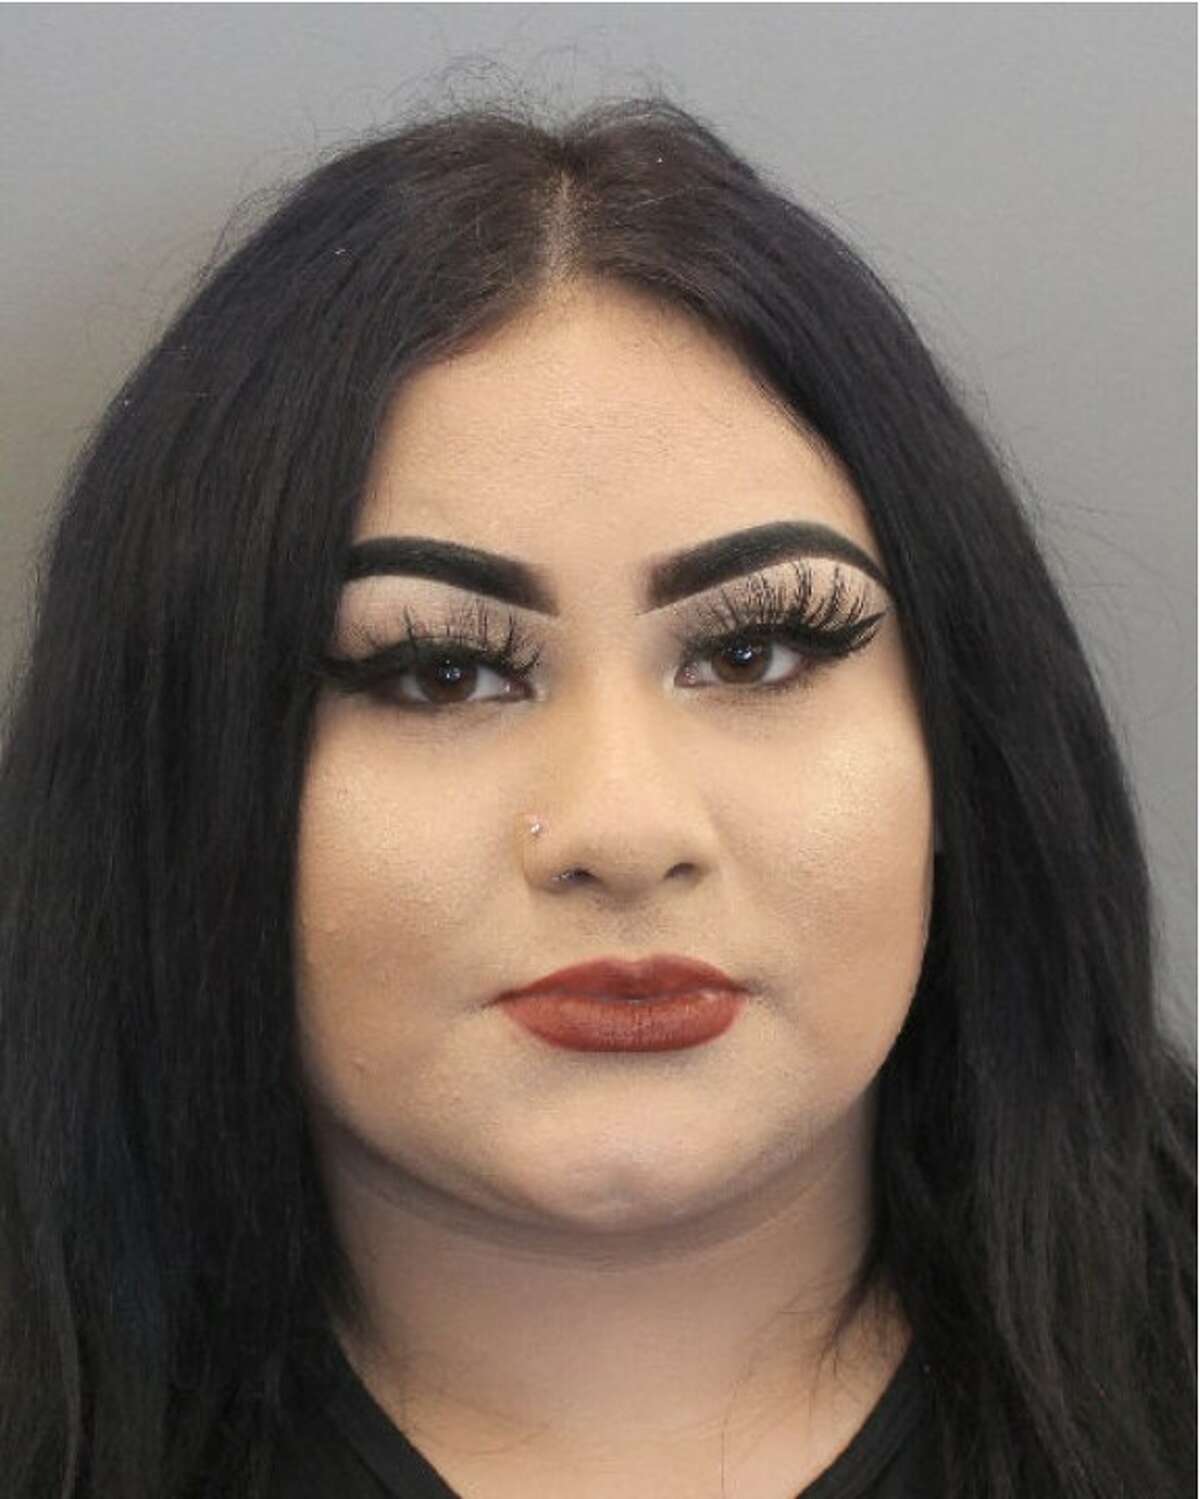 Authorities are asking the public's help in locating Karla Morales, 20, after she allegedly cut off her GPS ankle monitor while she awaited trial for role in the 2018 MS-13 machete murder of 24-year-old Jose Villanueva.